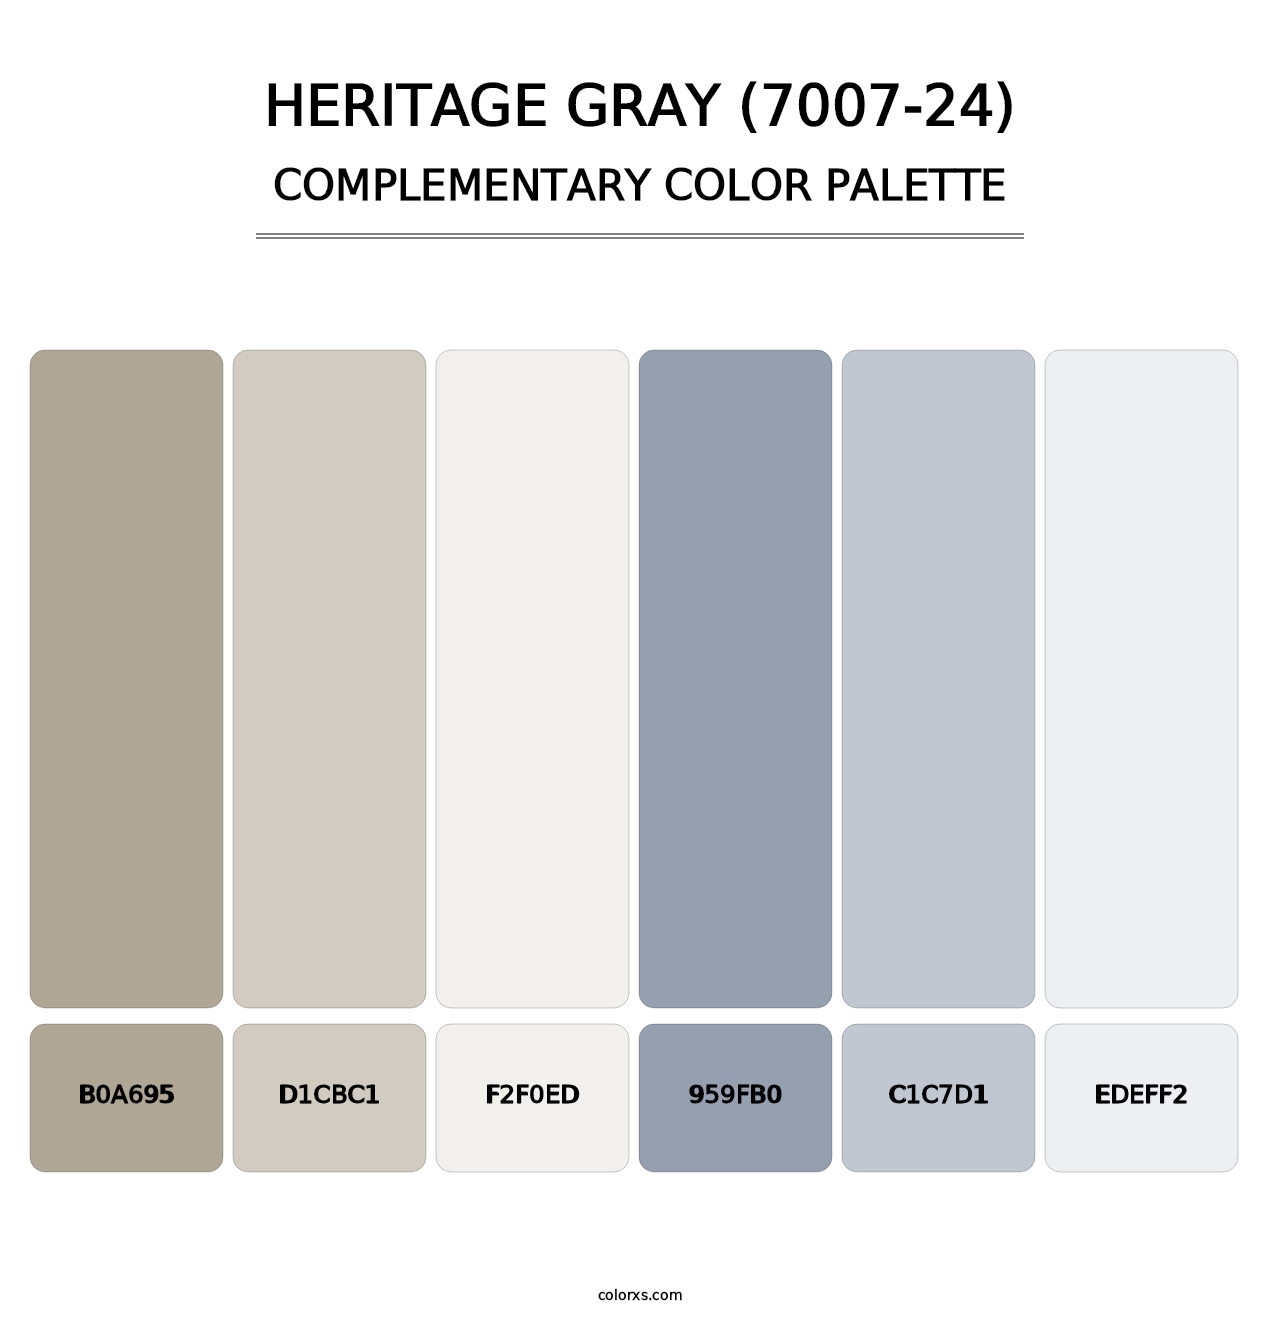 Heritage Gray (7007-24) - Complementary Color Palette